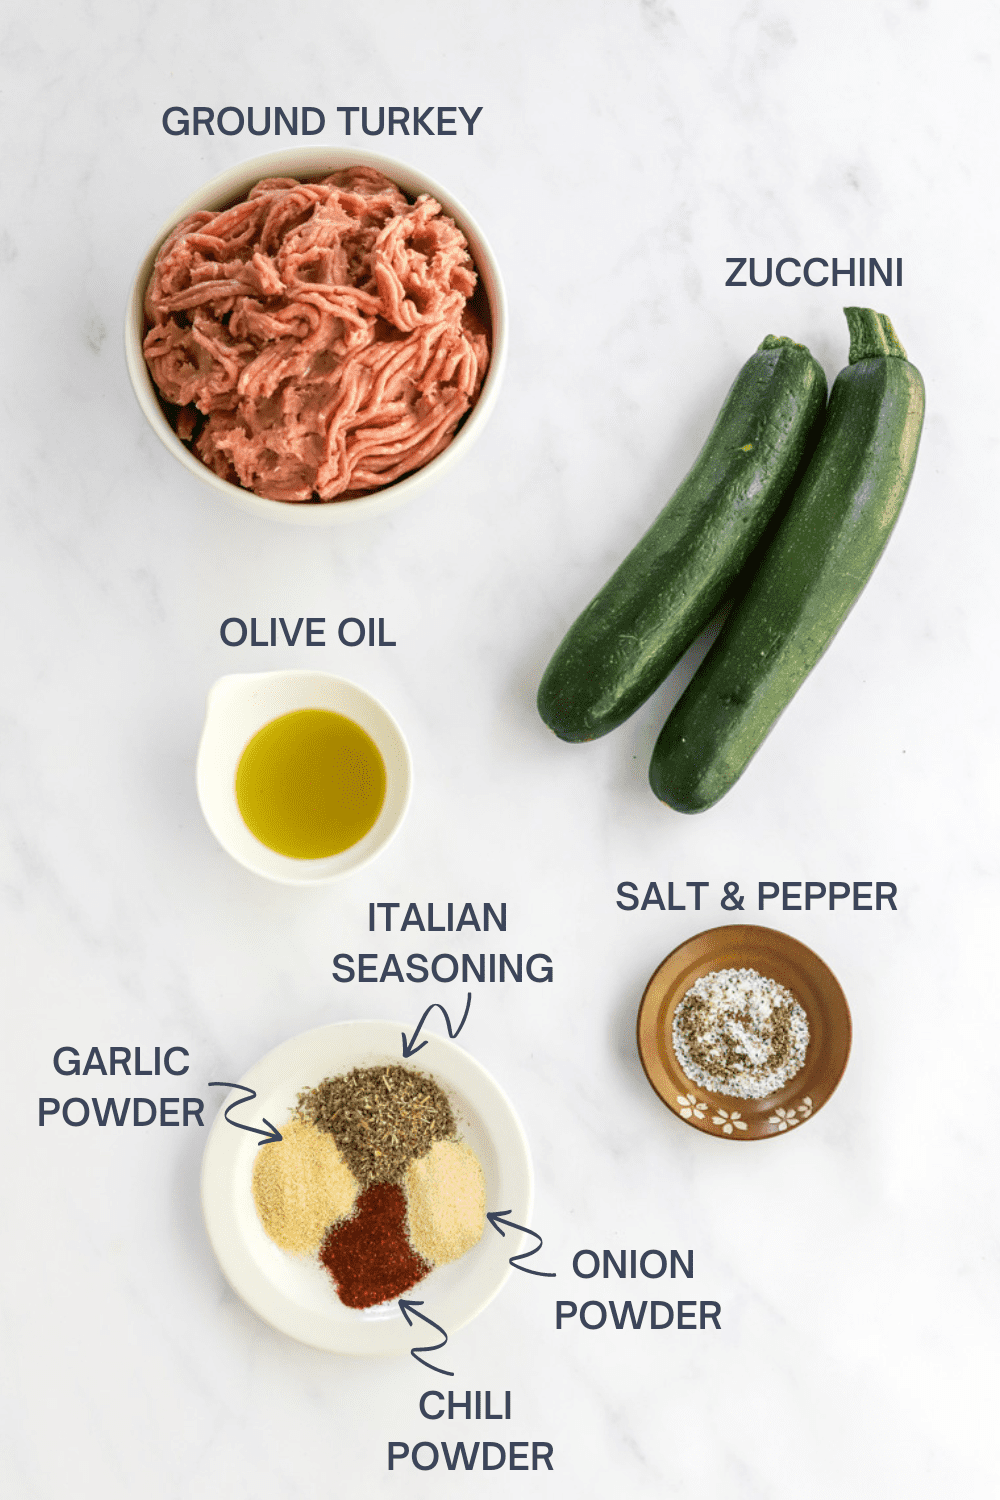 Zucchini, raw ground turkey. olive oil and spices on a white surface with labels for each ingredient. 